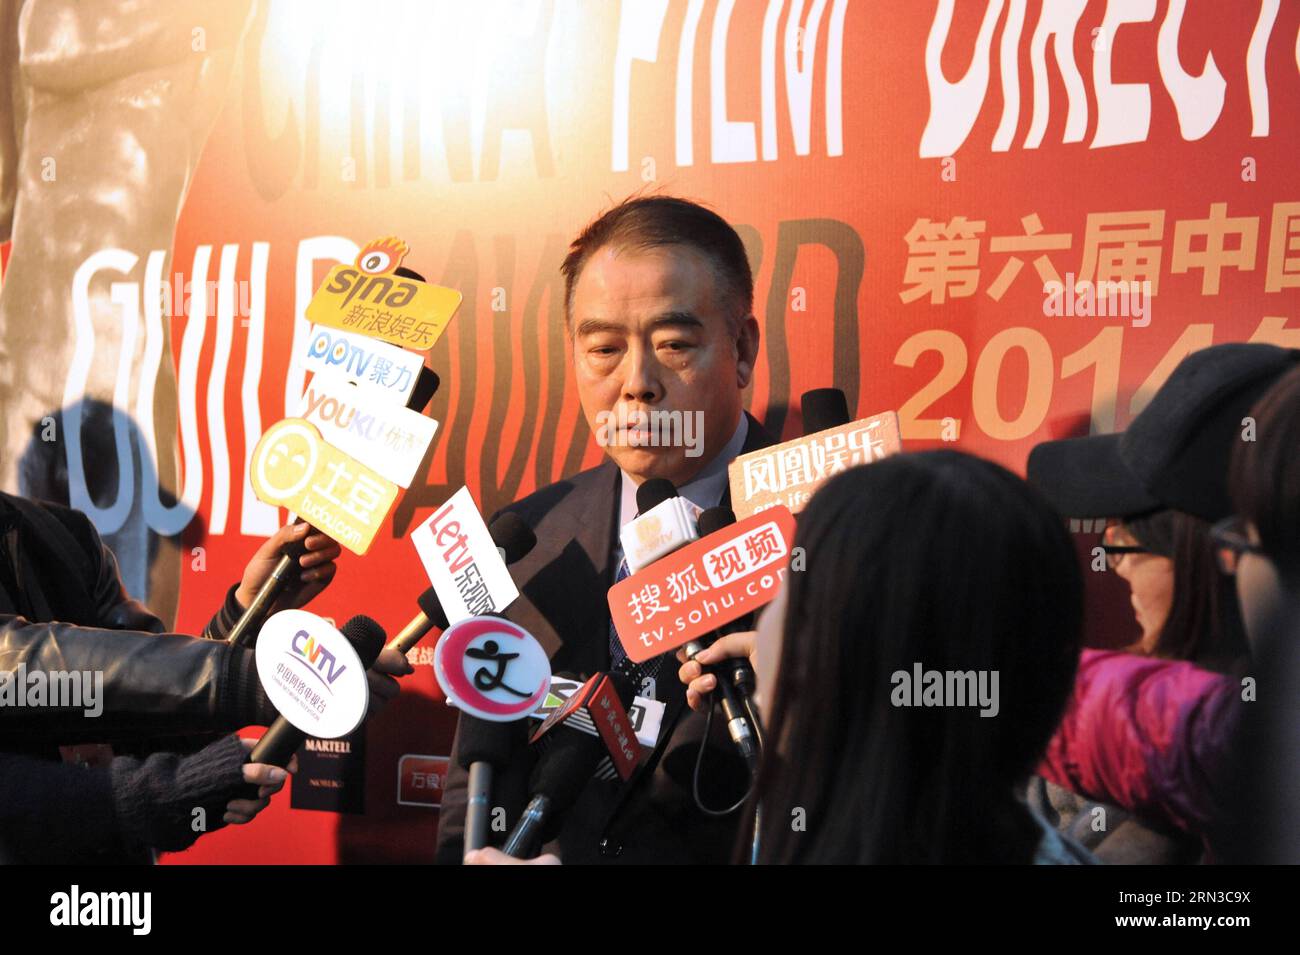 Director Chen Kaige is interviewed at the 2014 annual awarding conference of China Film Directors Guild in Beijing, capital of China, April 12, 2015. ) (ytt) CHINA-BEIJING-FILM DIRECTORS GUILD(CN) JinxLiangkuai PUBLICATIONxNOTxINxCHN   Director Chen Kaige IS interviewed AT The 2014 Annual awarding Conference of China Film Directors Guild in Beijing Capital of China April 12 2015  China Beijing Film Directors Guild CN JinxLiangkuai PUBLICATIONxNOTxINxCHN Stock Photo